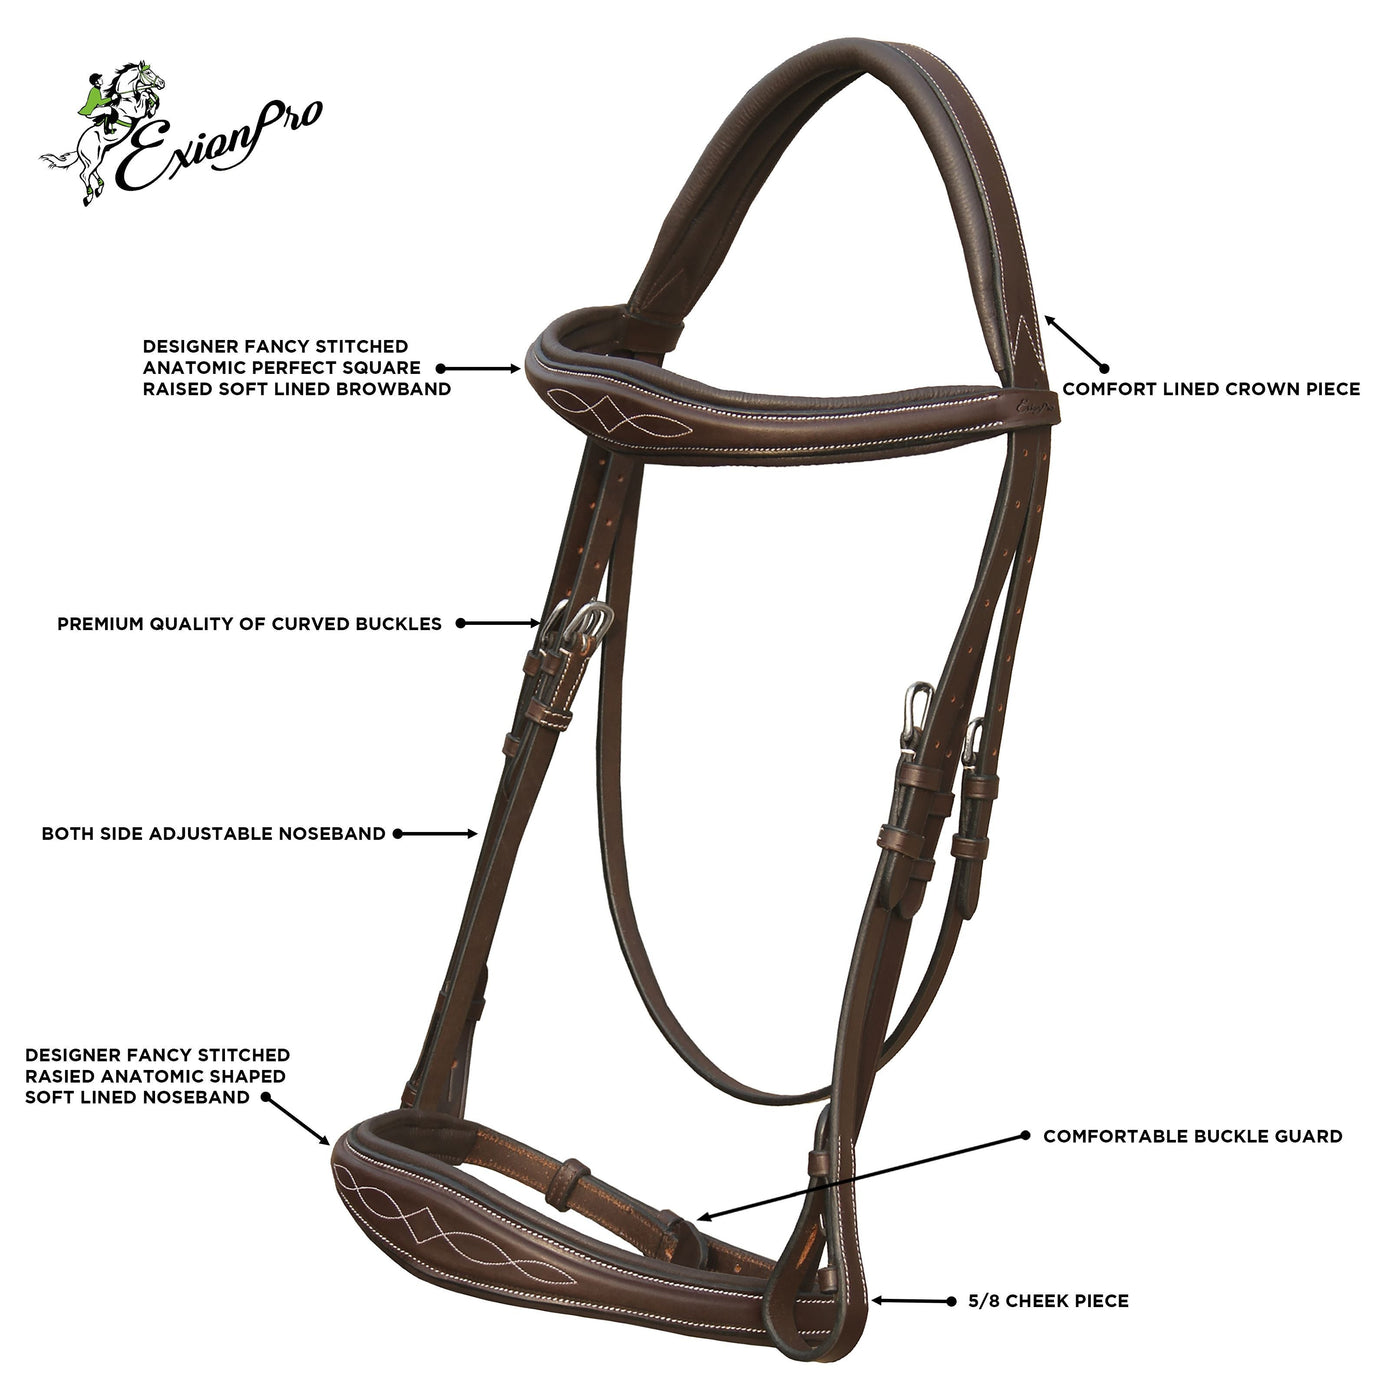 ExionPro Fancy Stitched Raised Anatomical Bridle with Reins without Flash